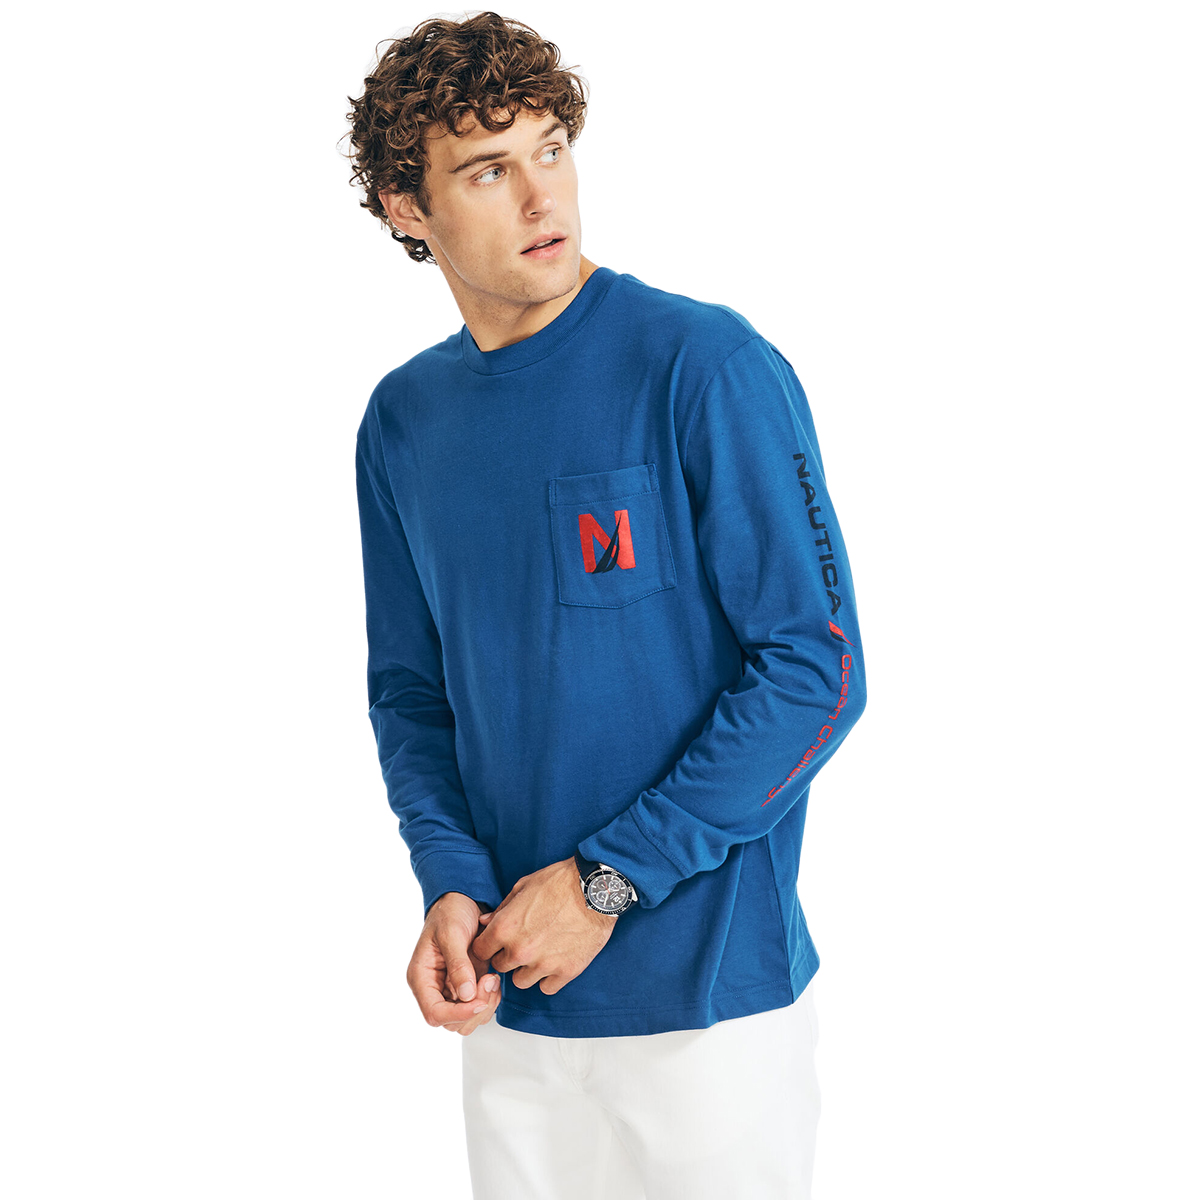 Nautica Men's Sustainably Crafted Long-Sleeve Graphic Tee